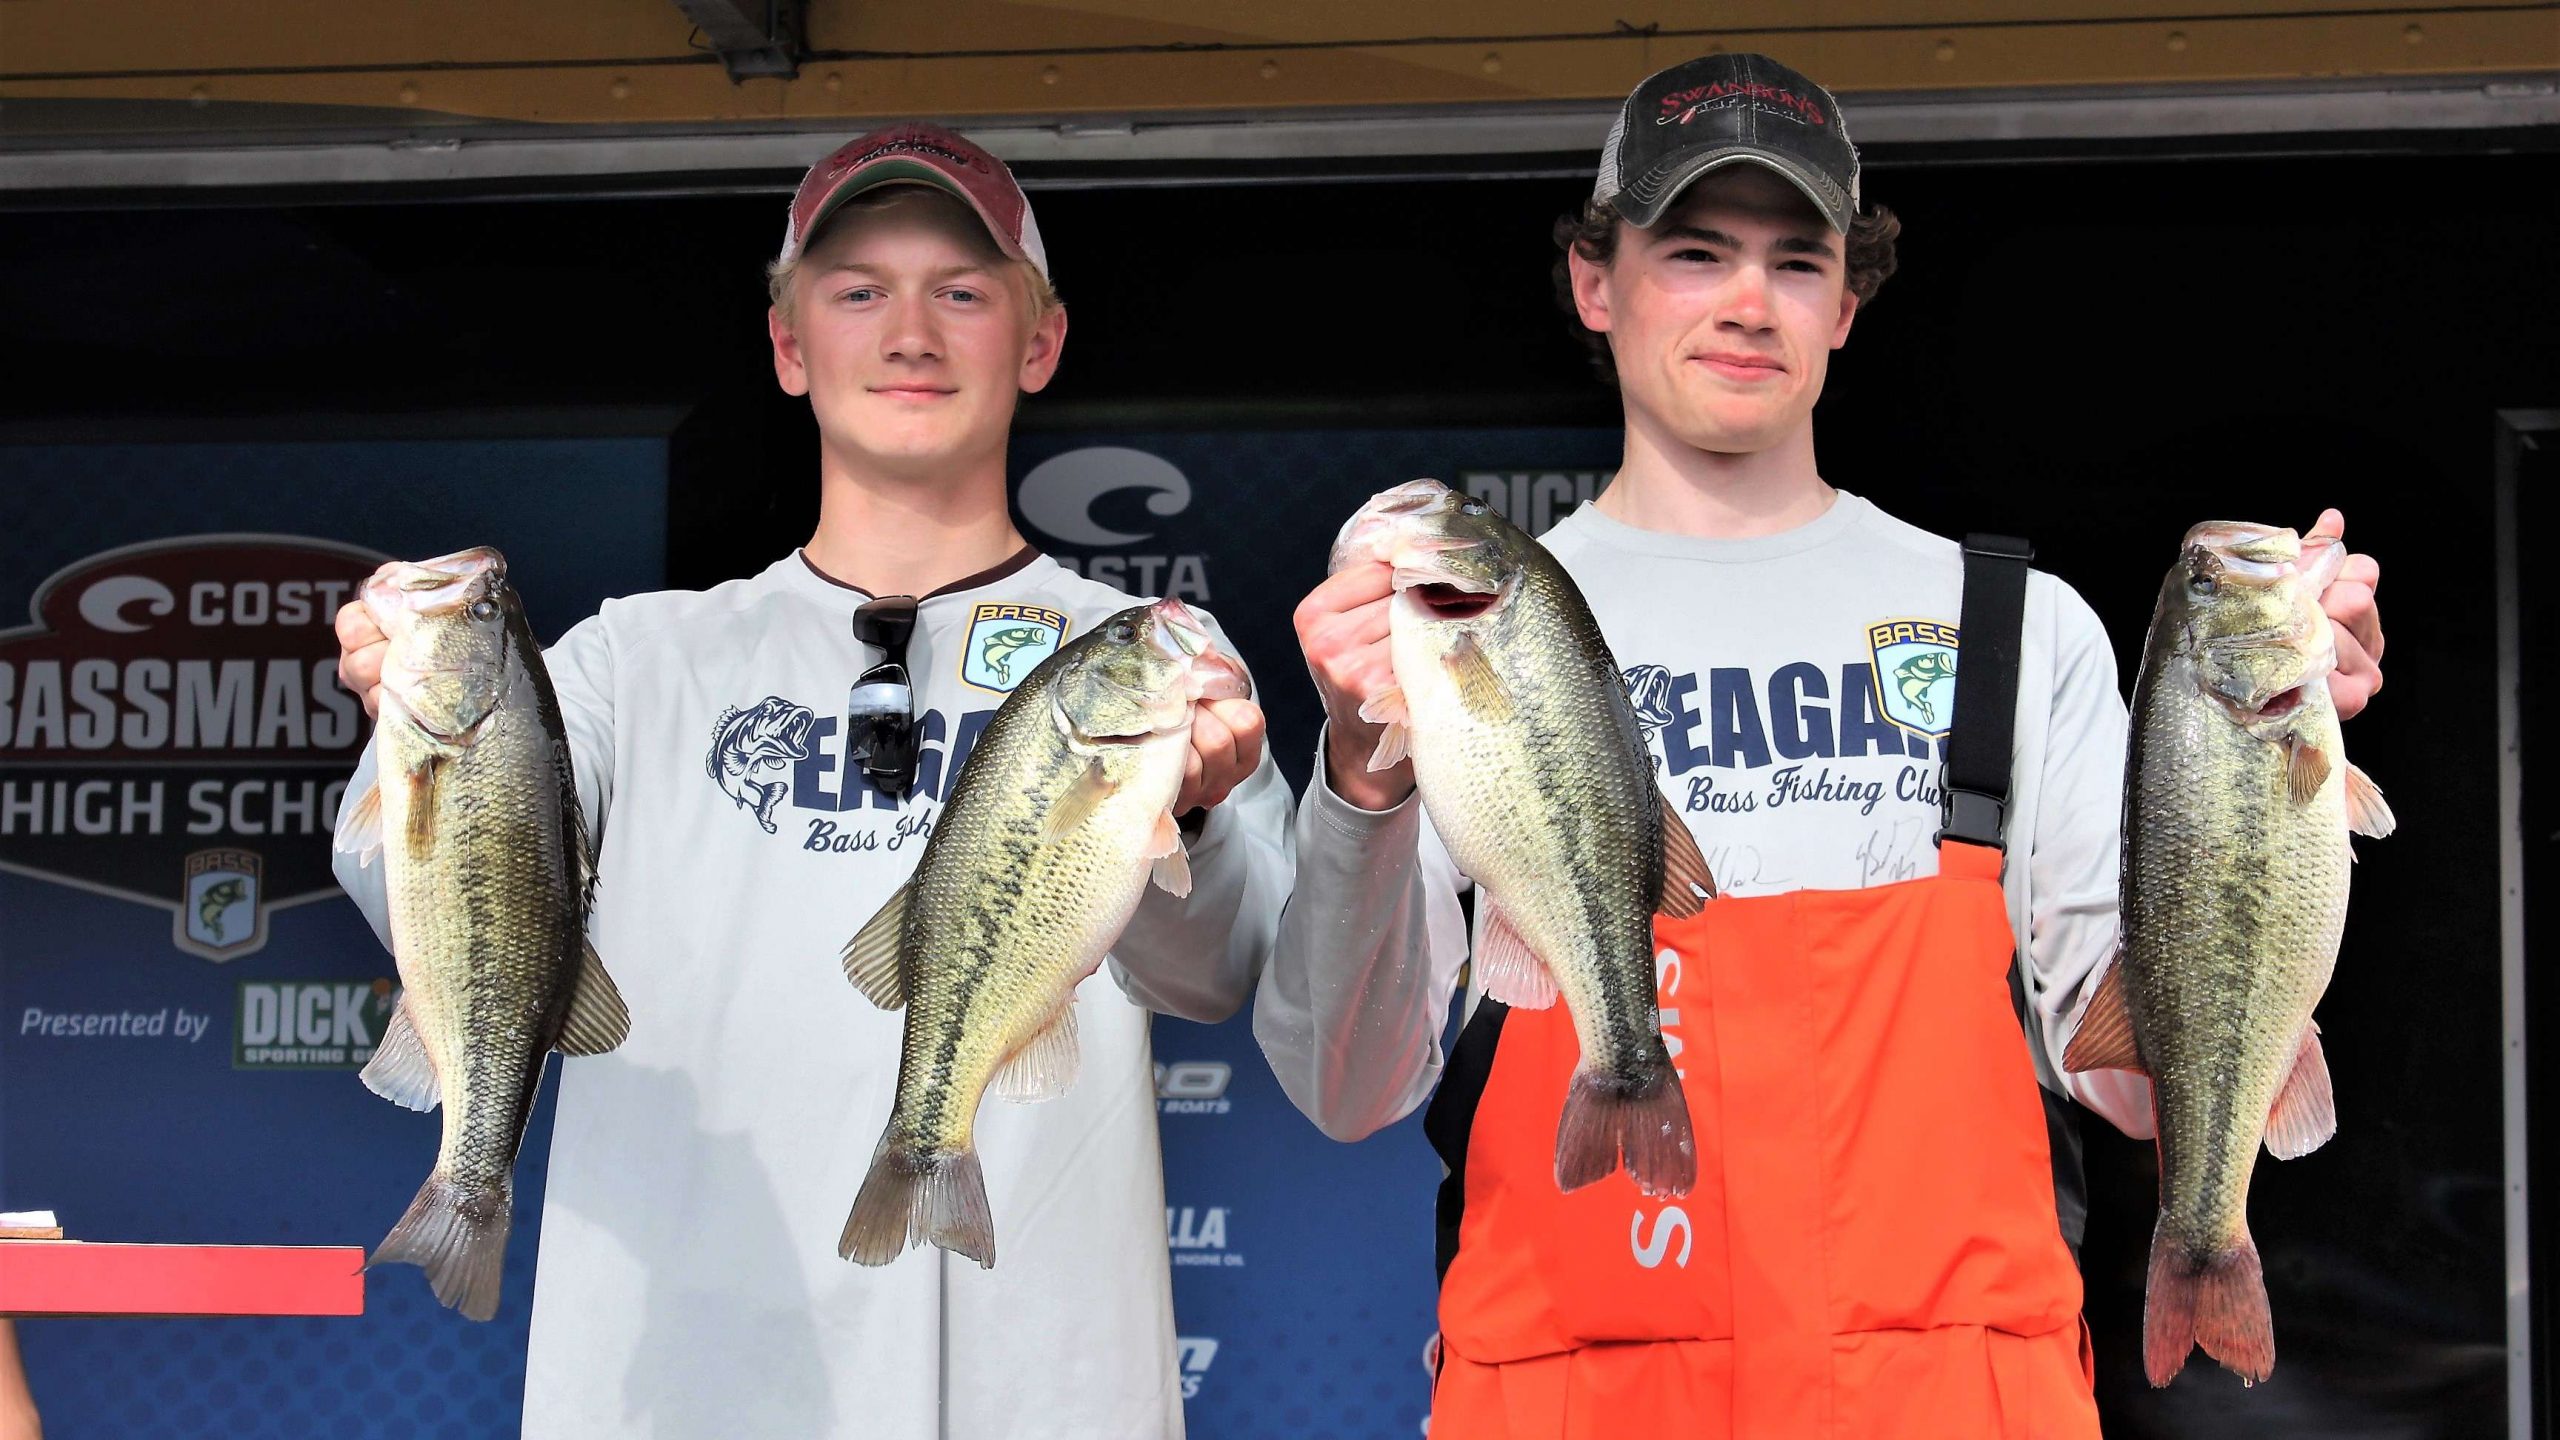  Brian Linder and Nathan Thompson of Eagan (Minn.) High weighed 13-13 which at the time was good for a tie with Fletcher and White. The Minnesota boys took the hot seat because they caught five bass, while Fletcher and White had to vacate the spot because they only caught four.